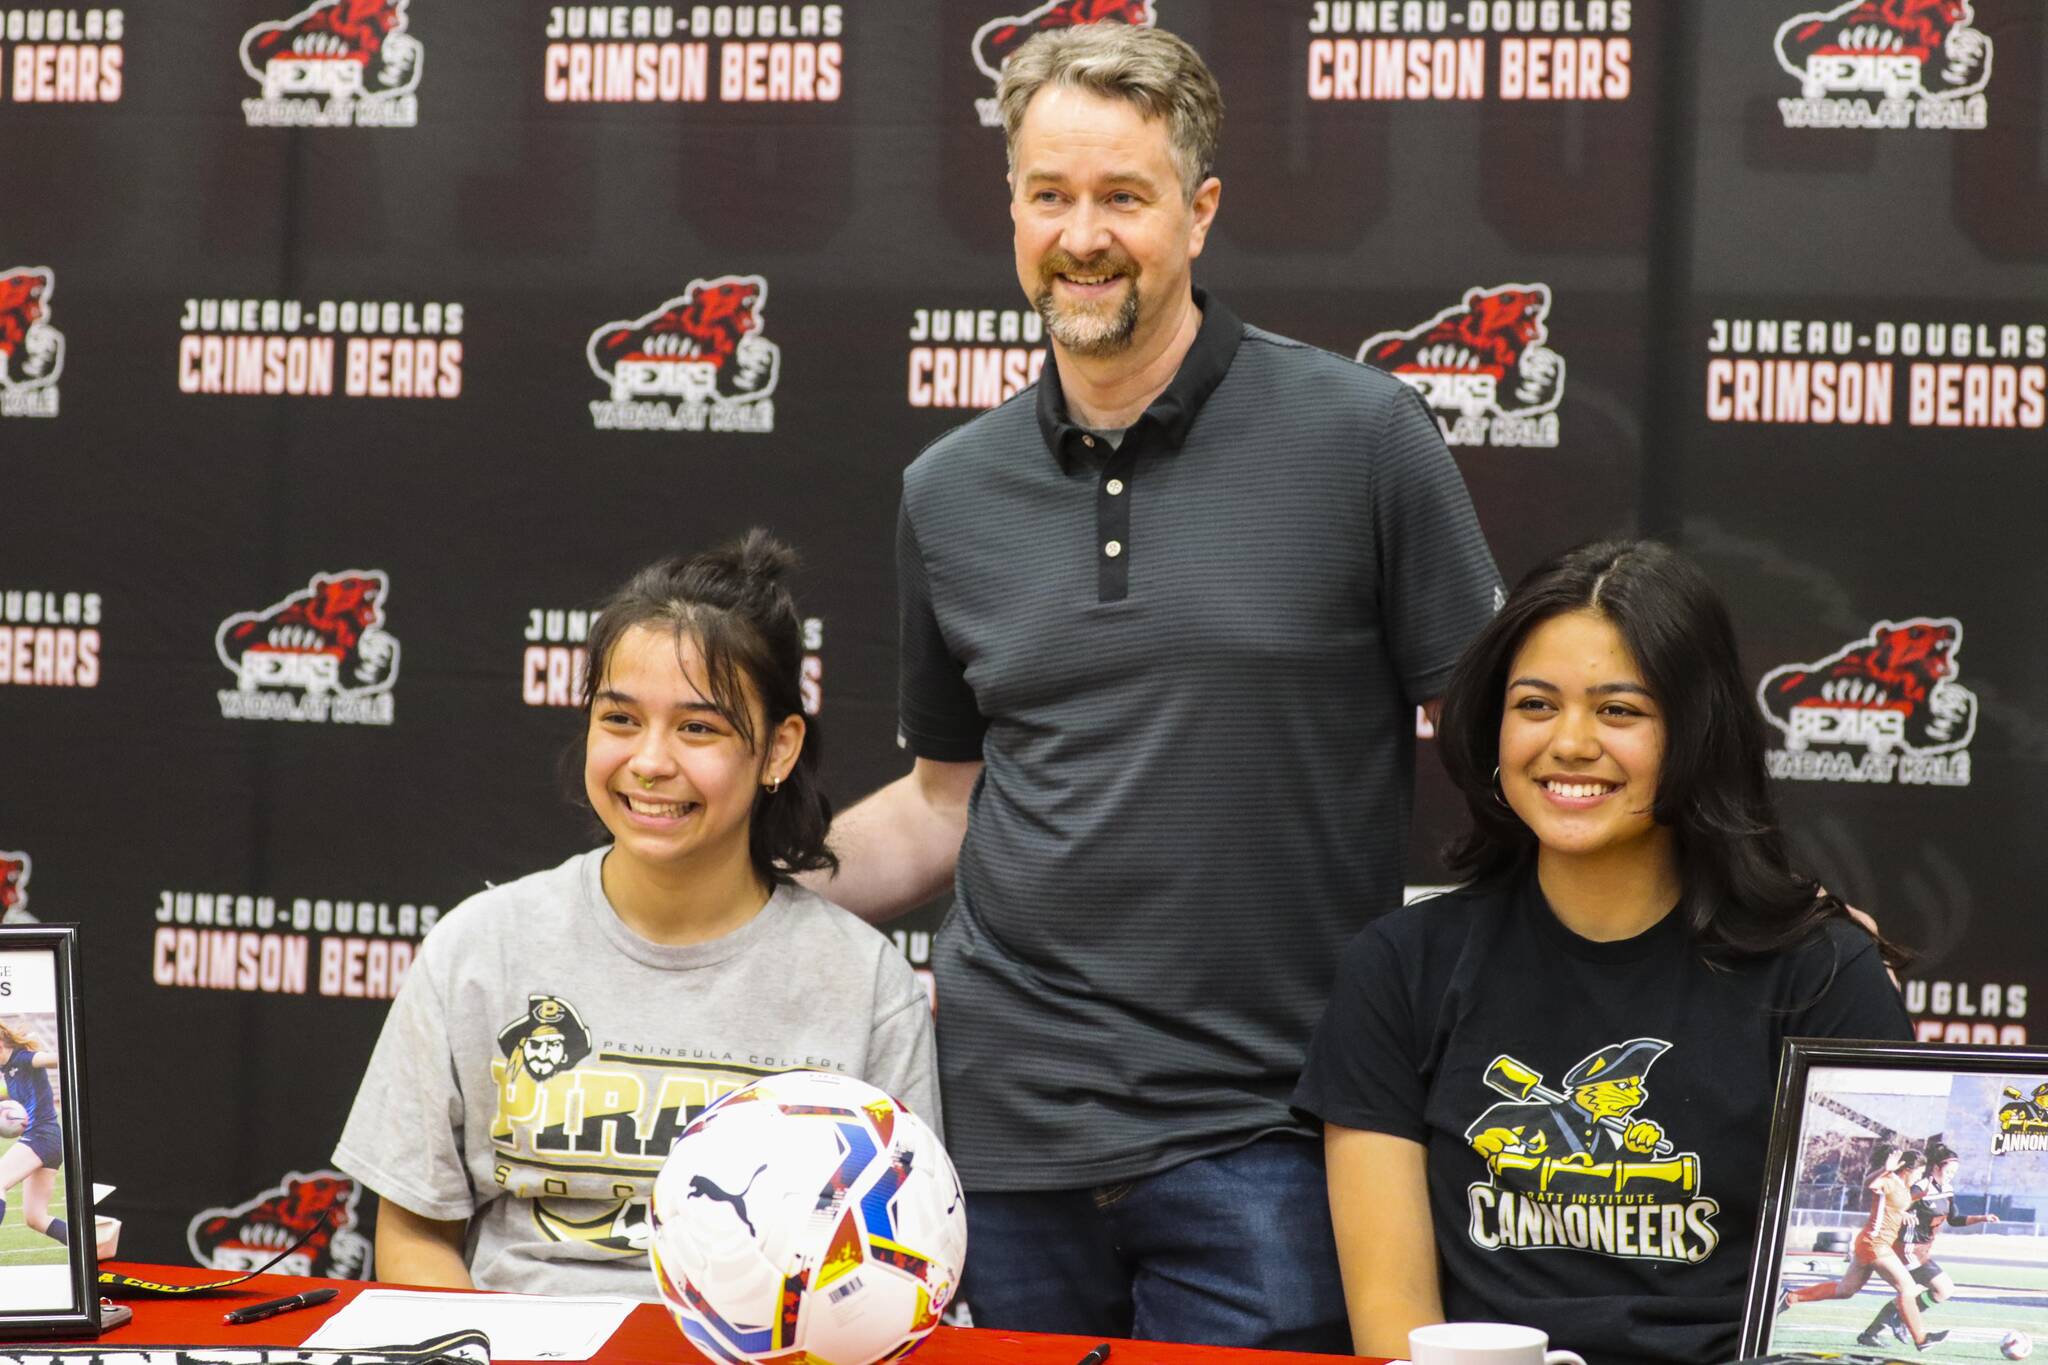 JDHS girls soccer coach Matt Dusenberry poses with Blake Plummer, left, and Sophia Pugh who just signed their letters of intent to play college soccer at separate schools May 9, 2022. (Michael S. Lockett / Juneau Empire)